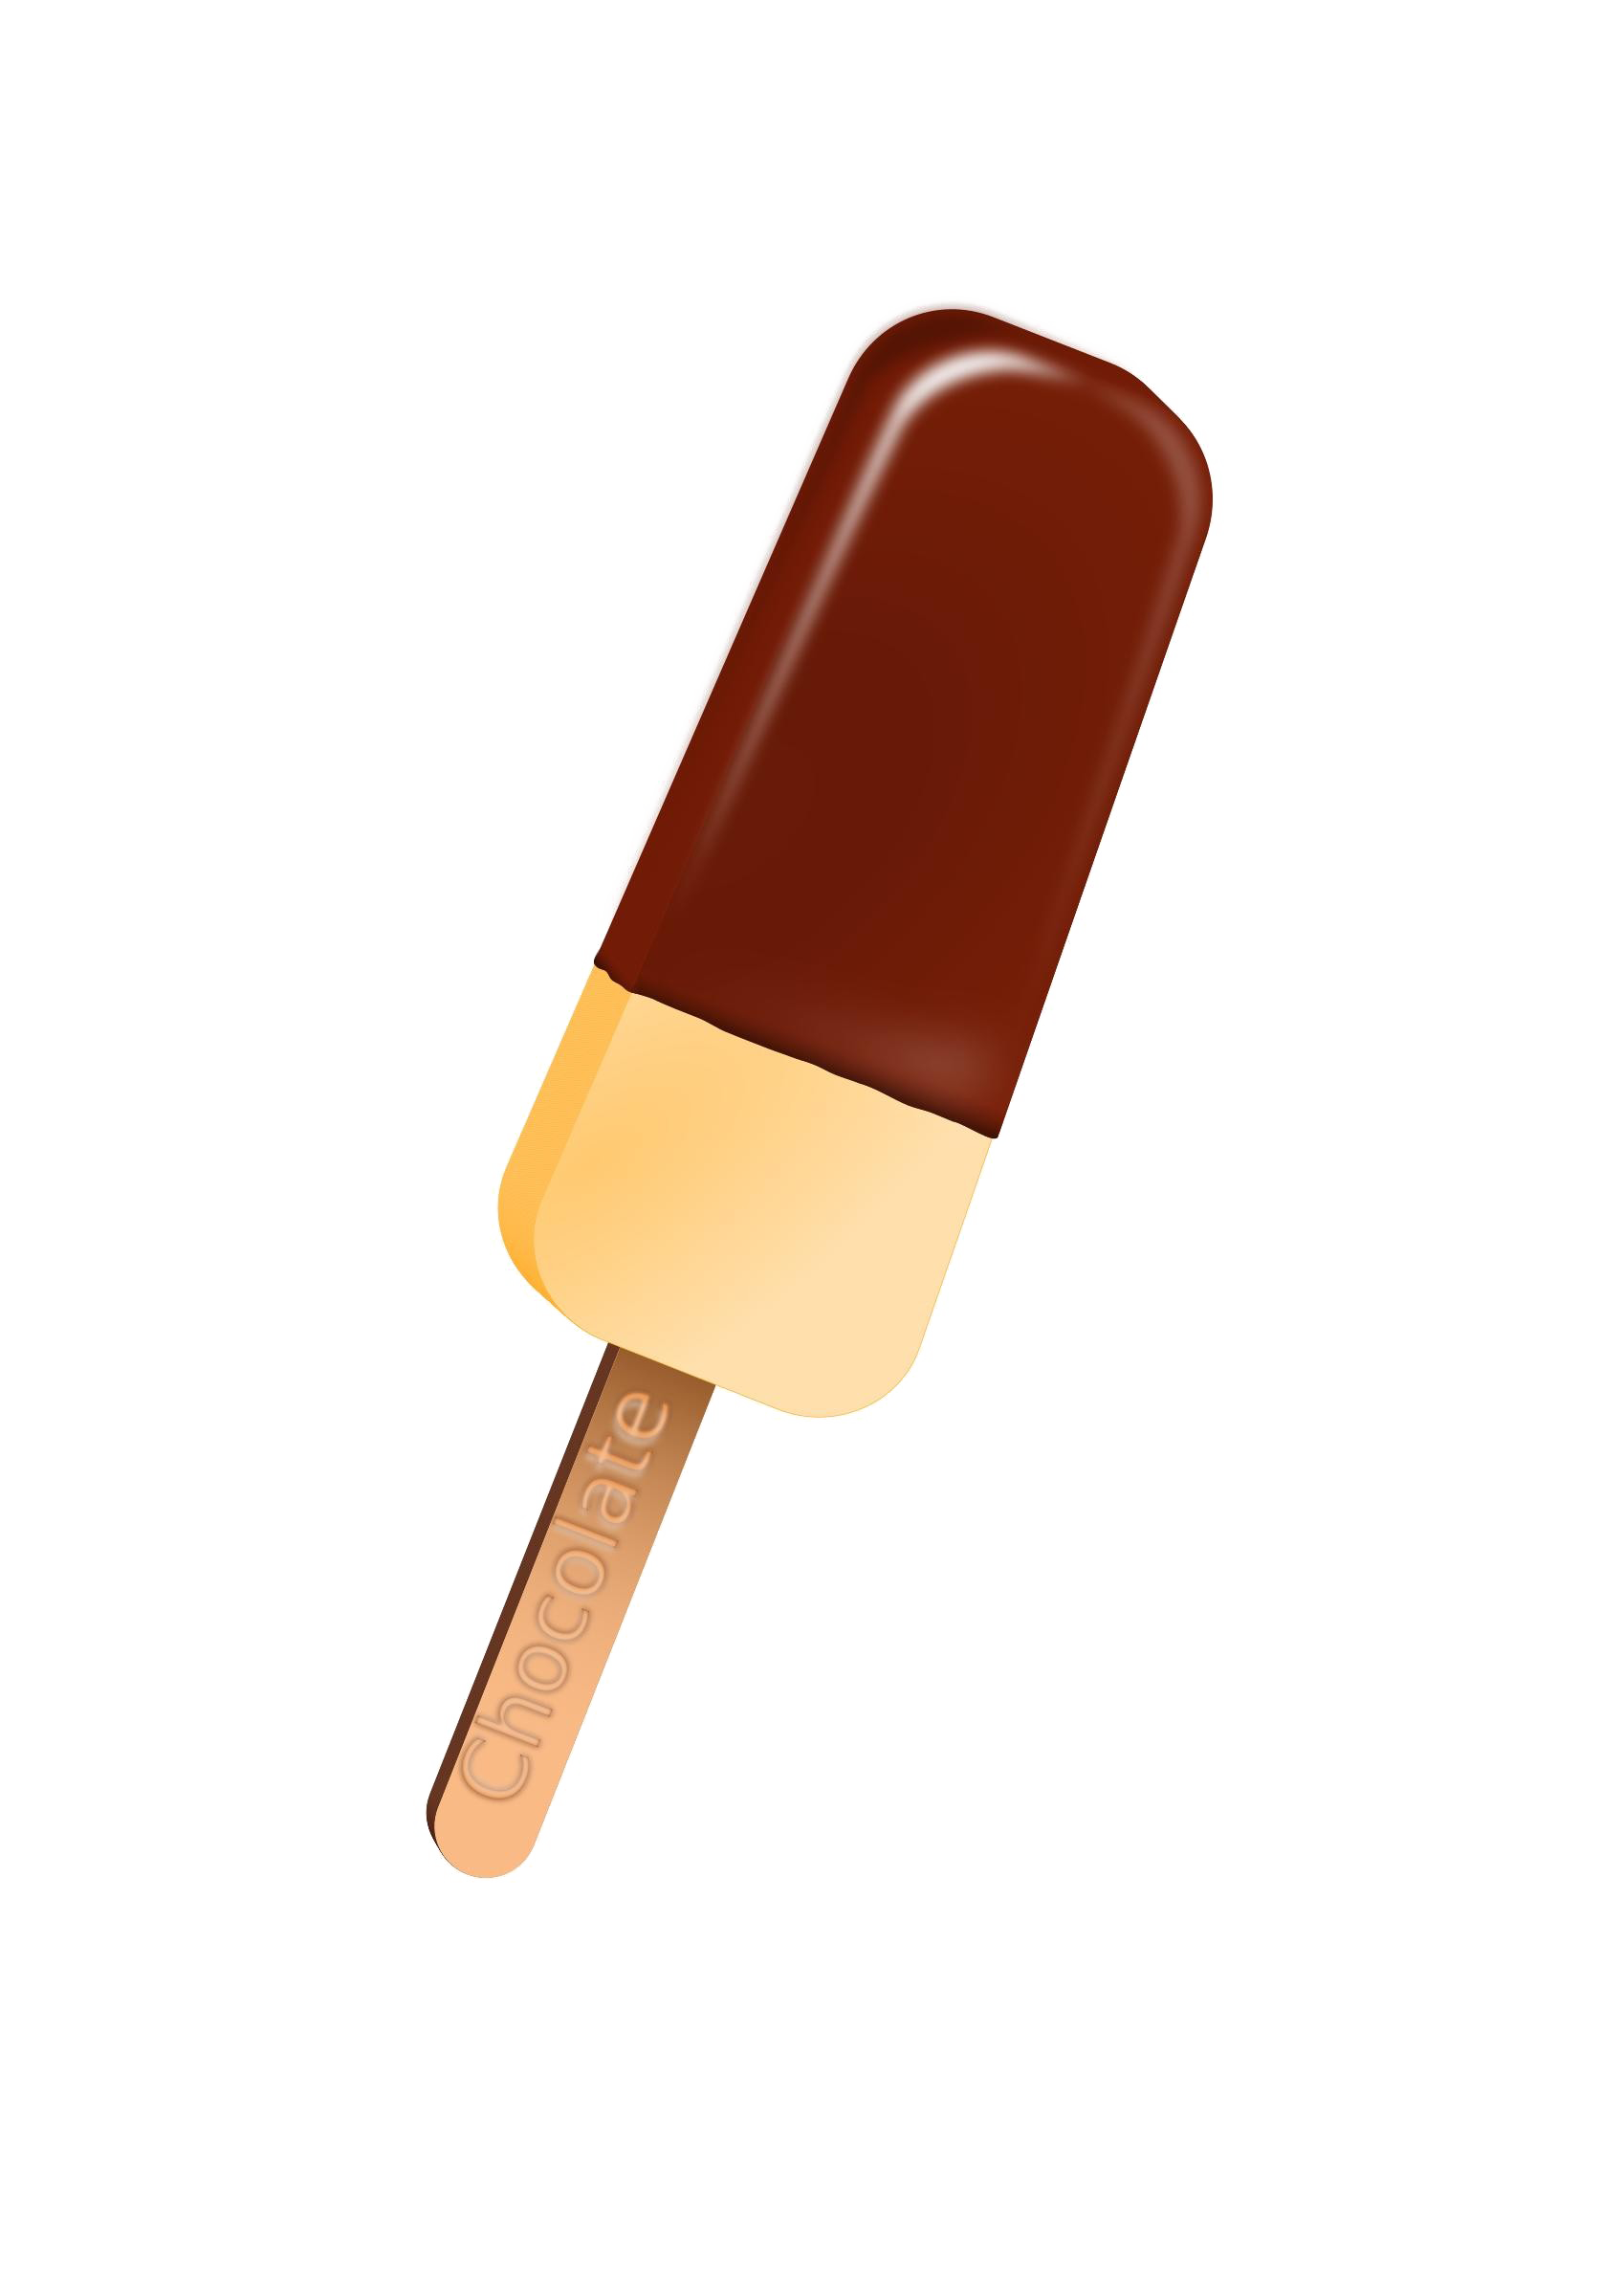 Download Ice Pop Free Clipart HD HQ PNG Image FreePNGImg.